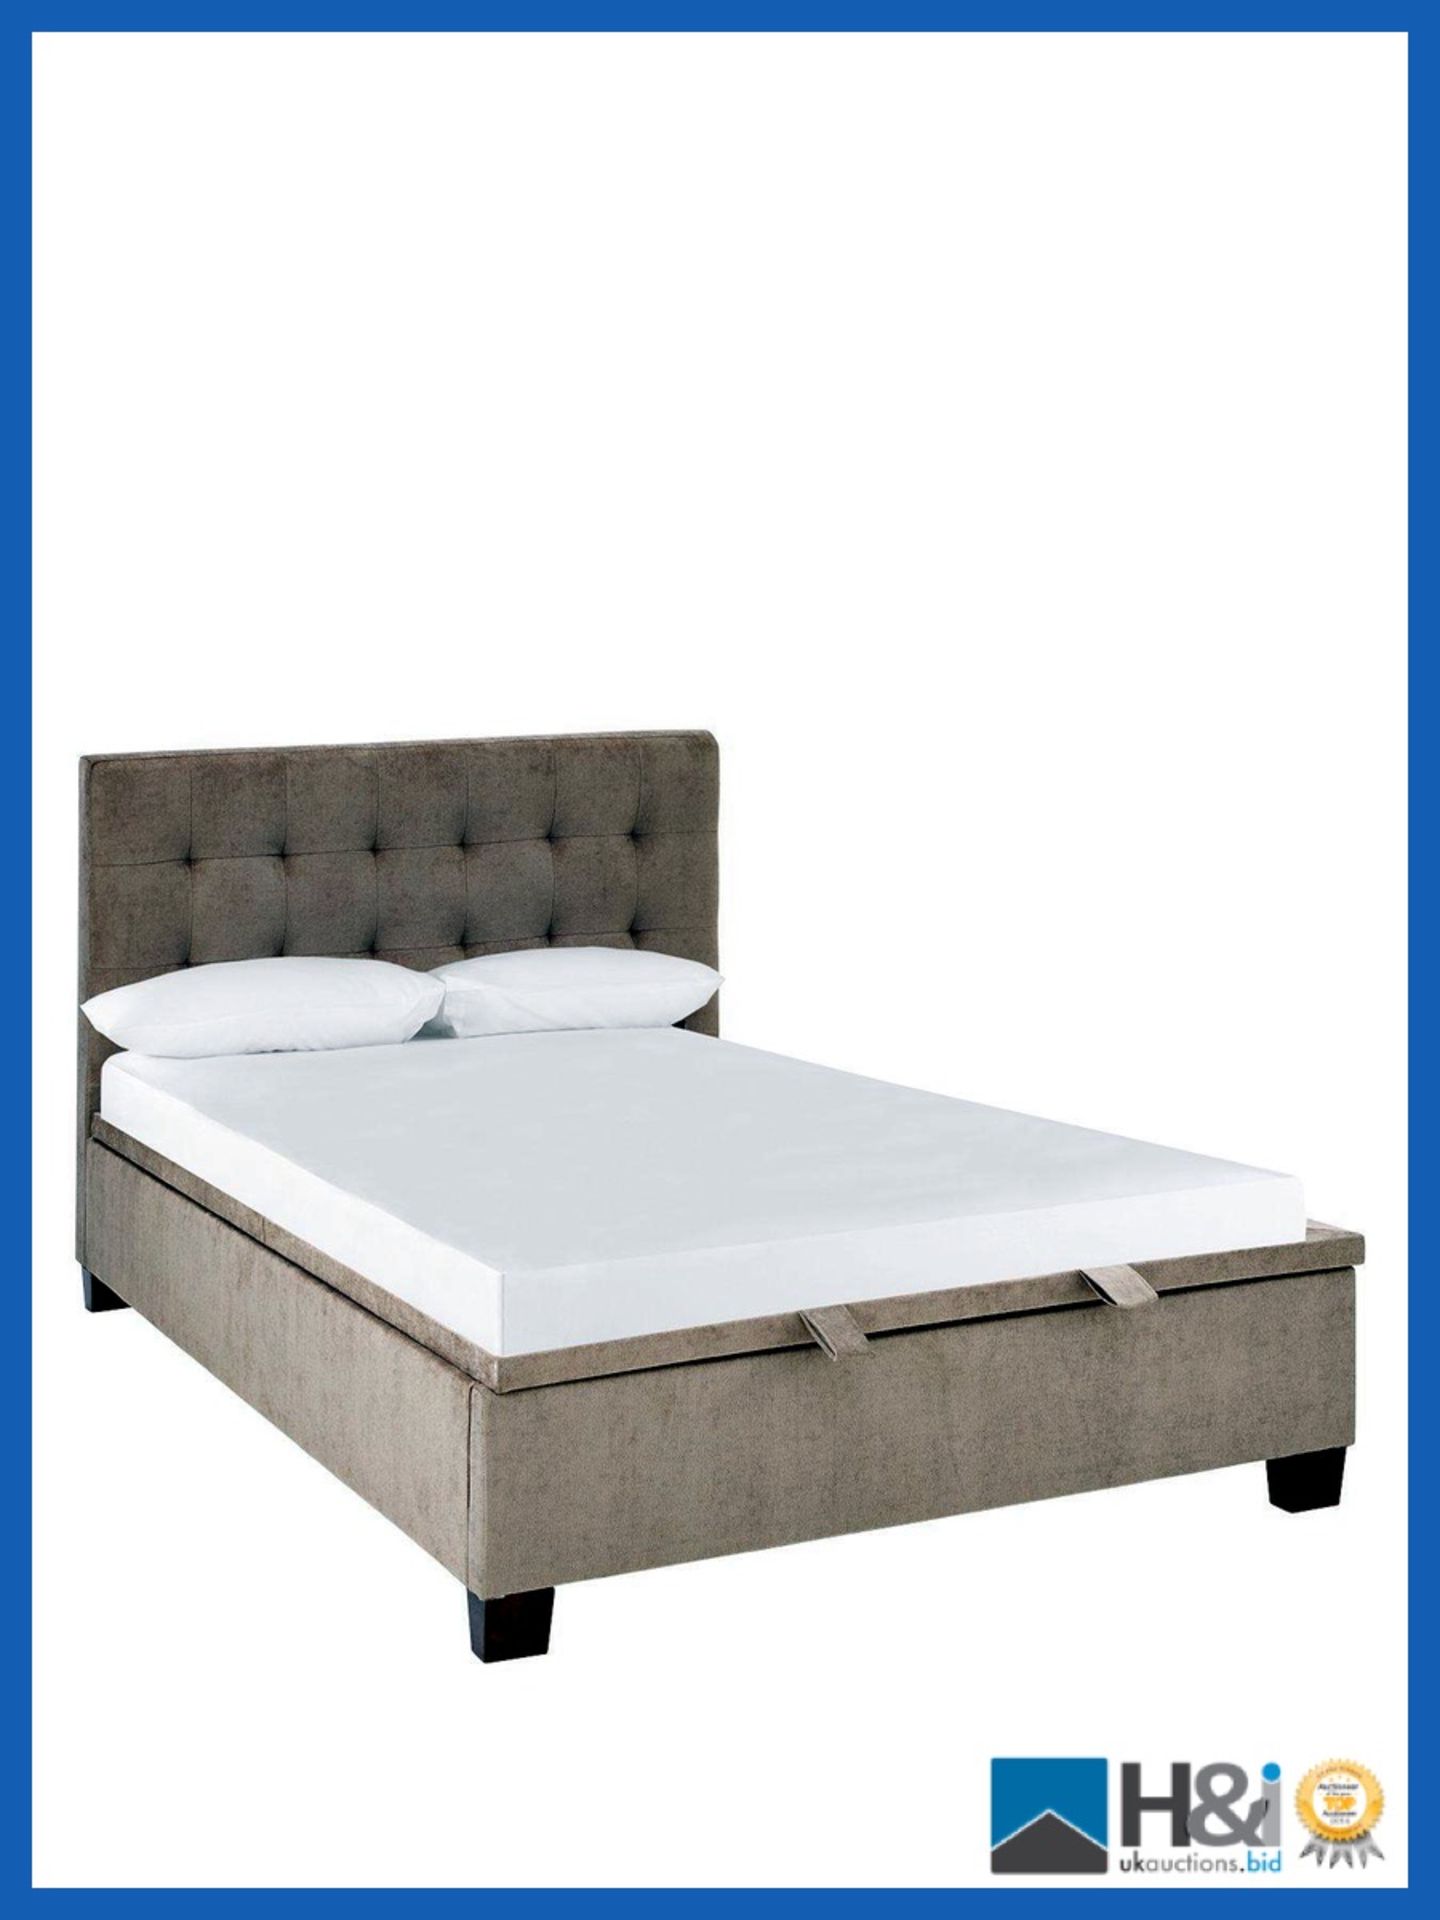 BOXED GRADE *A* ITEM ABIGAIL KING LIFT-UP BED [MINK] 110x155x216CM RRP:GBP 838.0